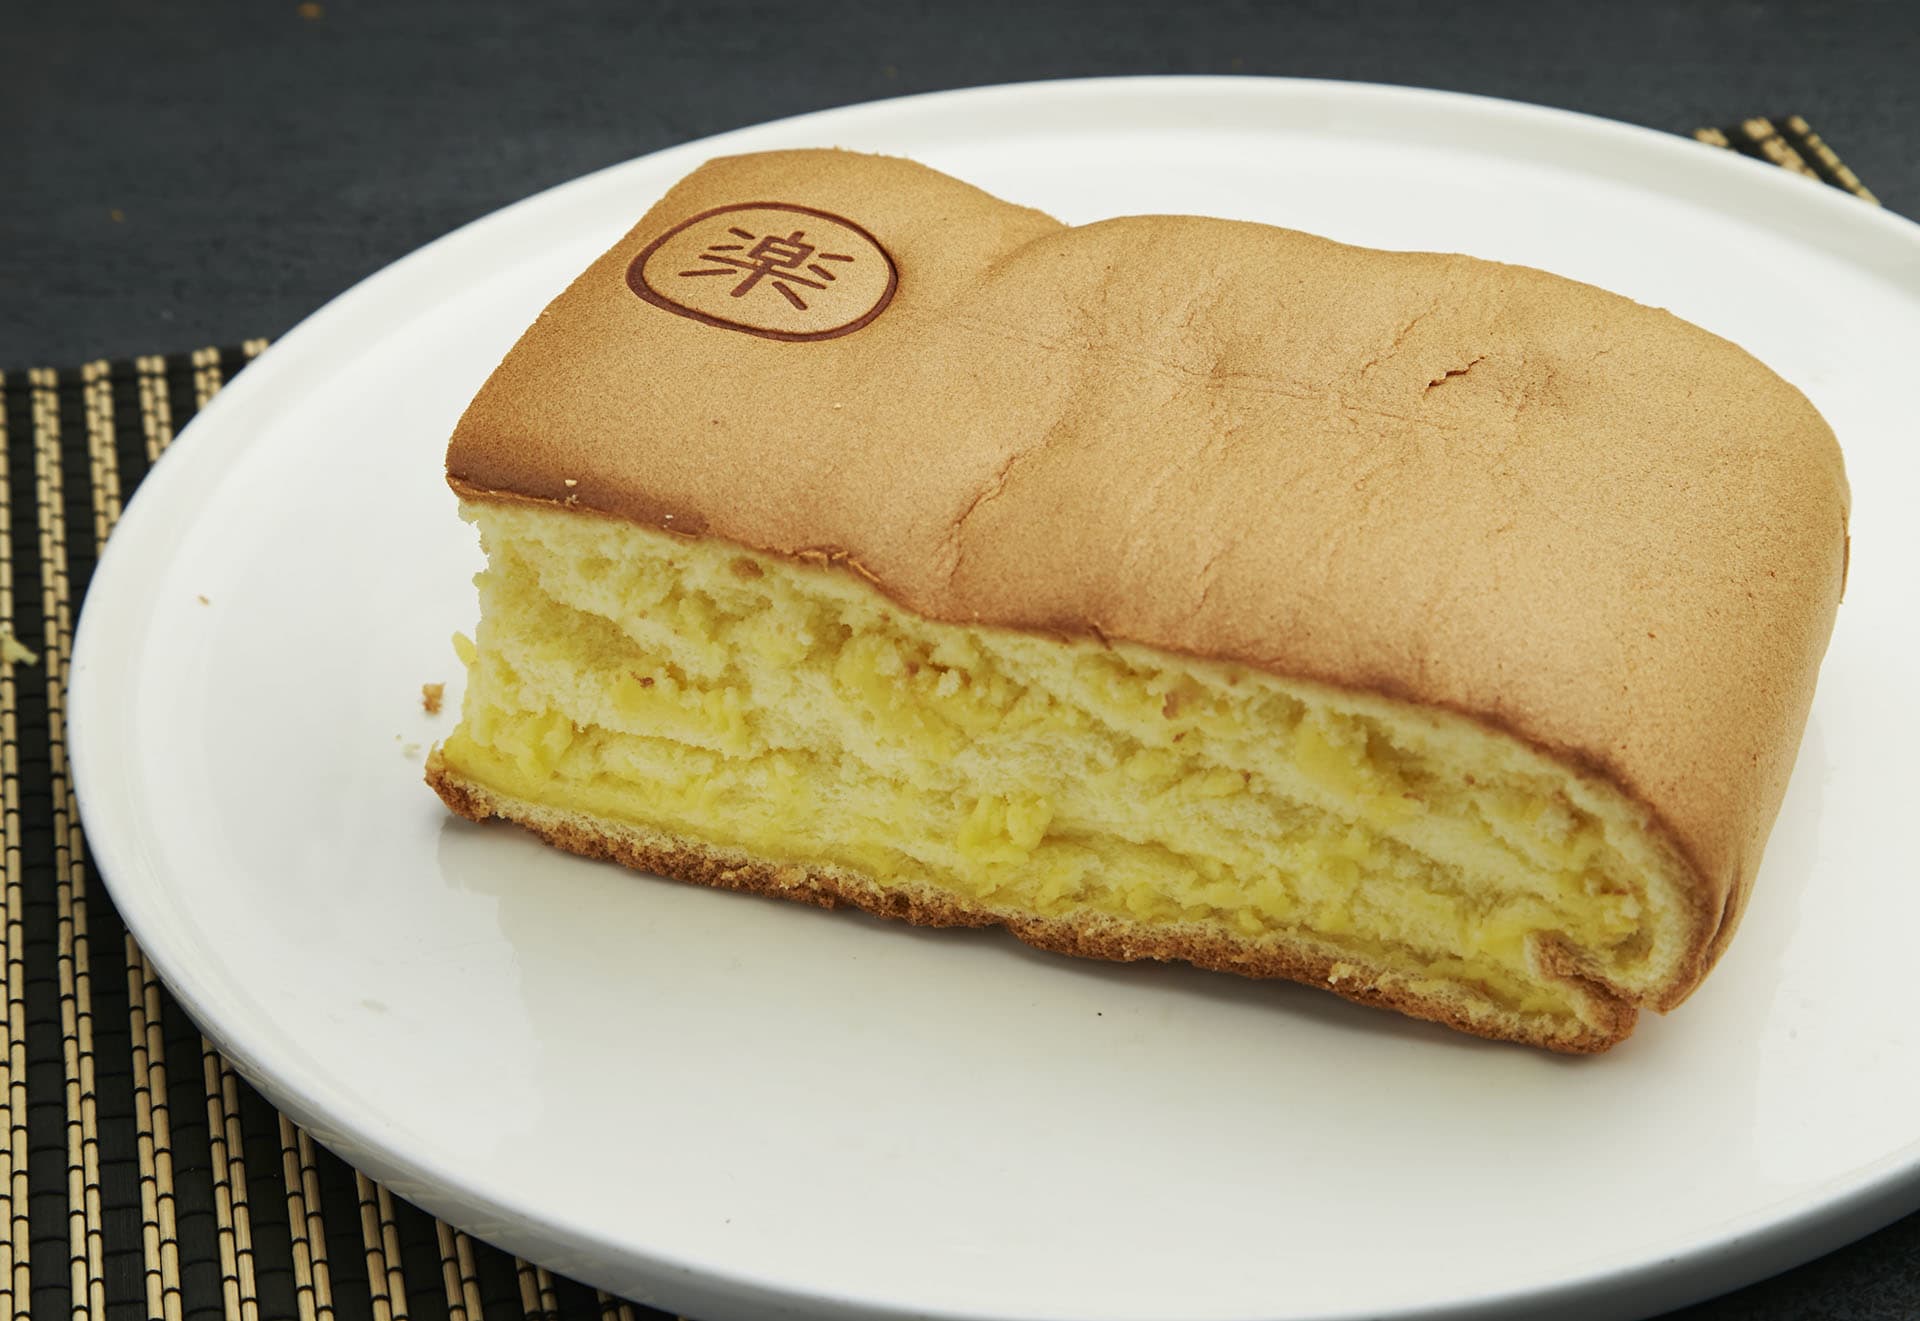 Closed] Le Castella Seoul – Popular Fluffy Castella Cake With Cheese, At  Lotte Myeongdong - DanielFoodDiary.com